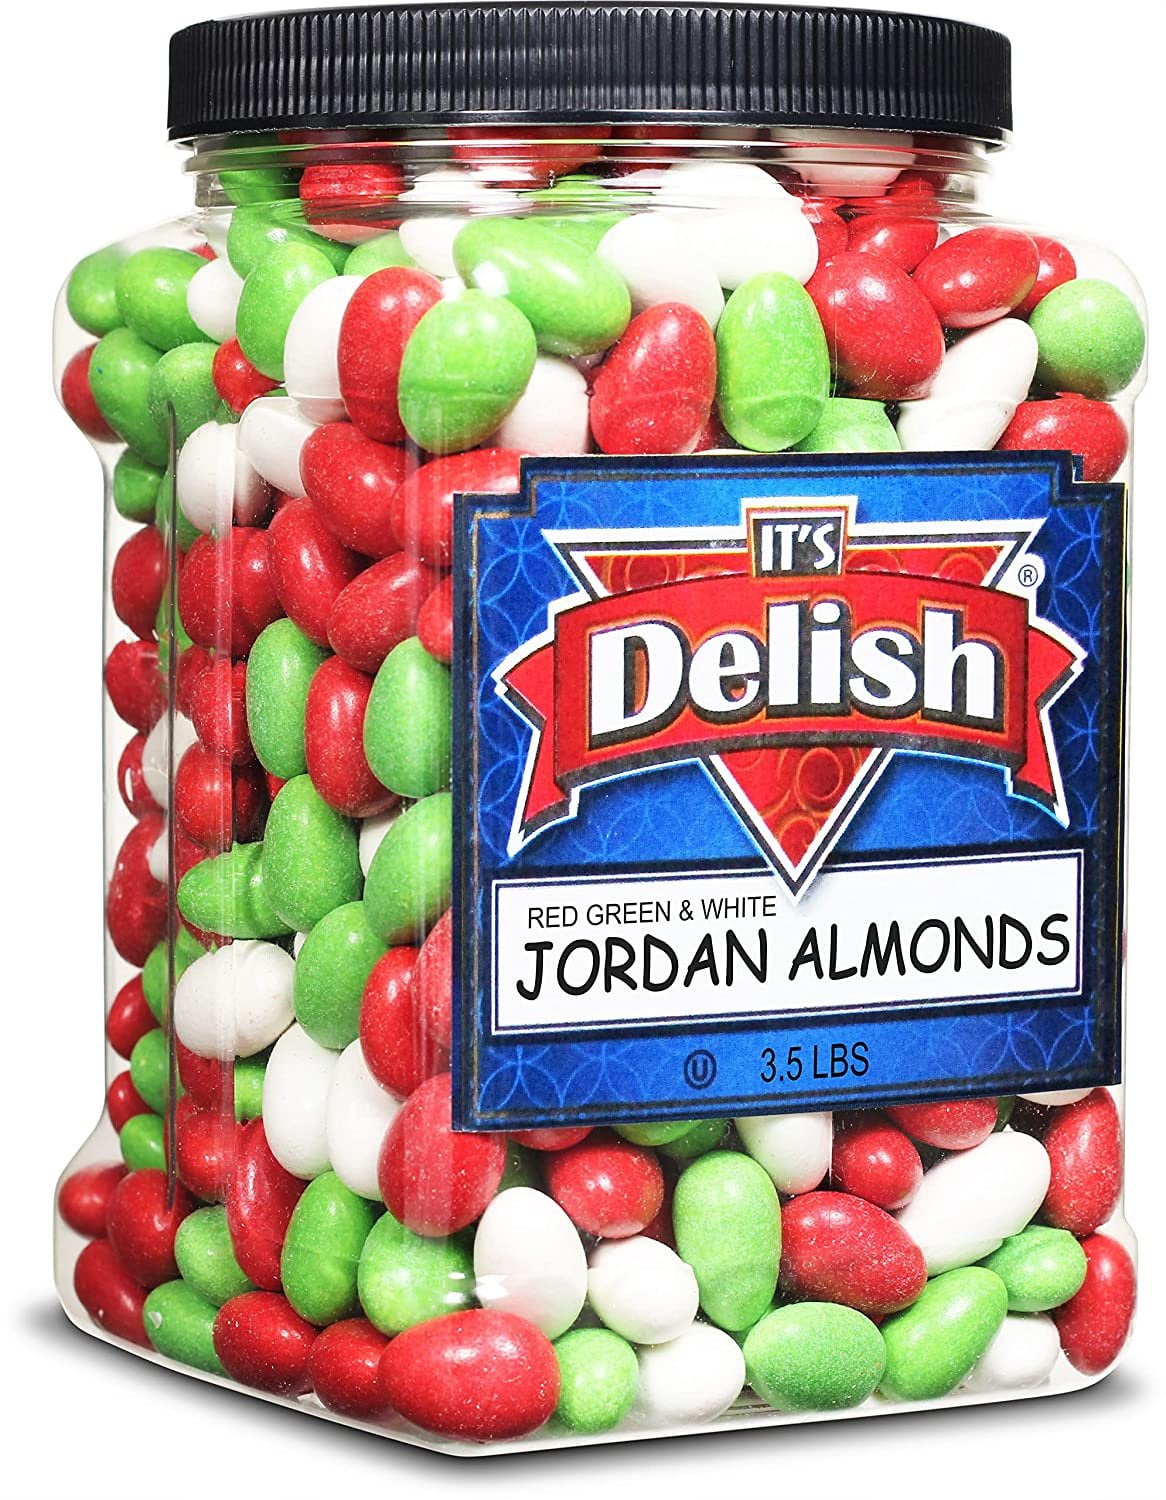 Christmas White, Red & Green Jordan Almonds by Its Delish, 3.5 lbs ...